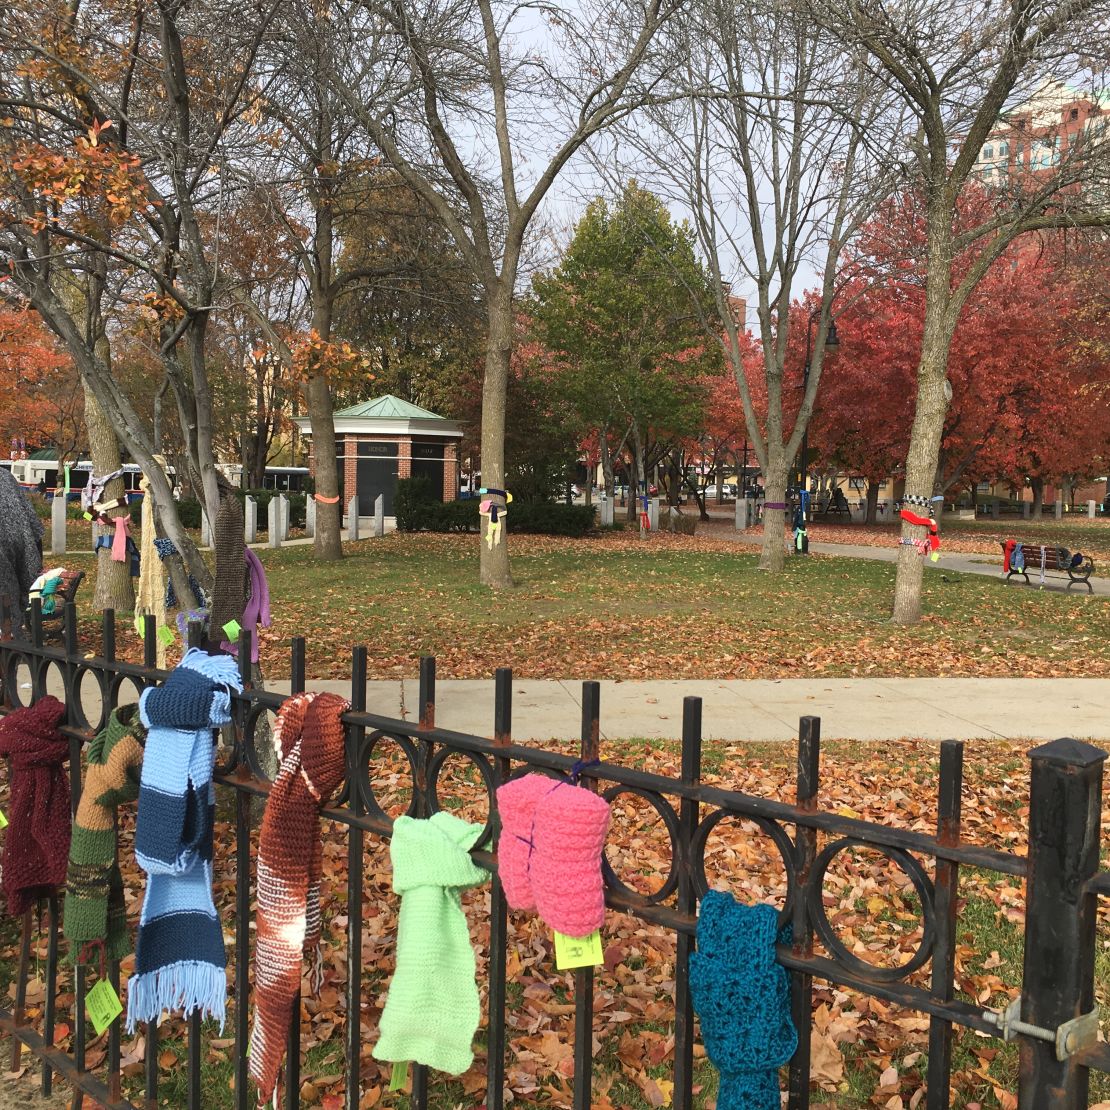 The brightly colored scarves and mittens adorn Veterans Memorial Park in Manchester.